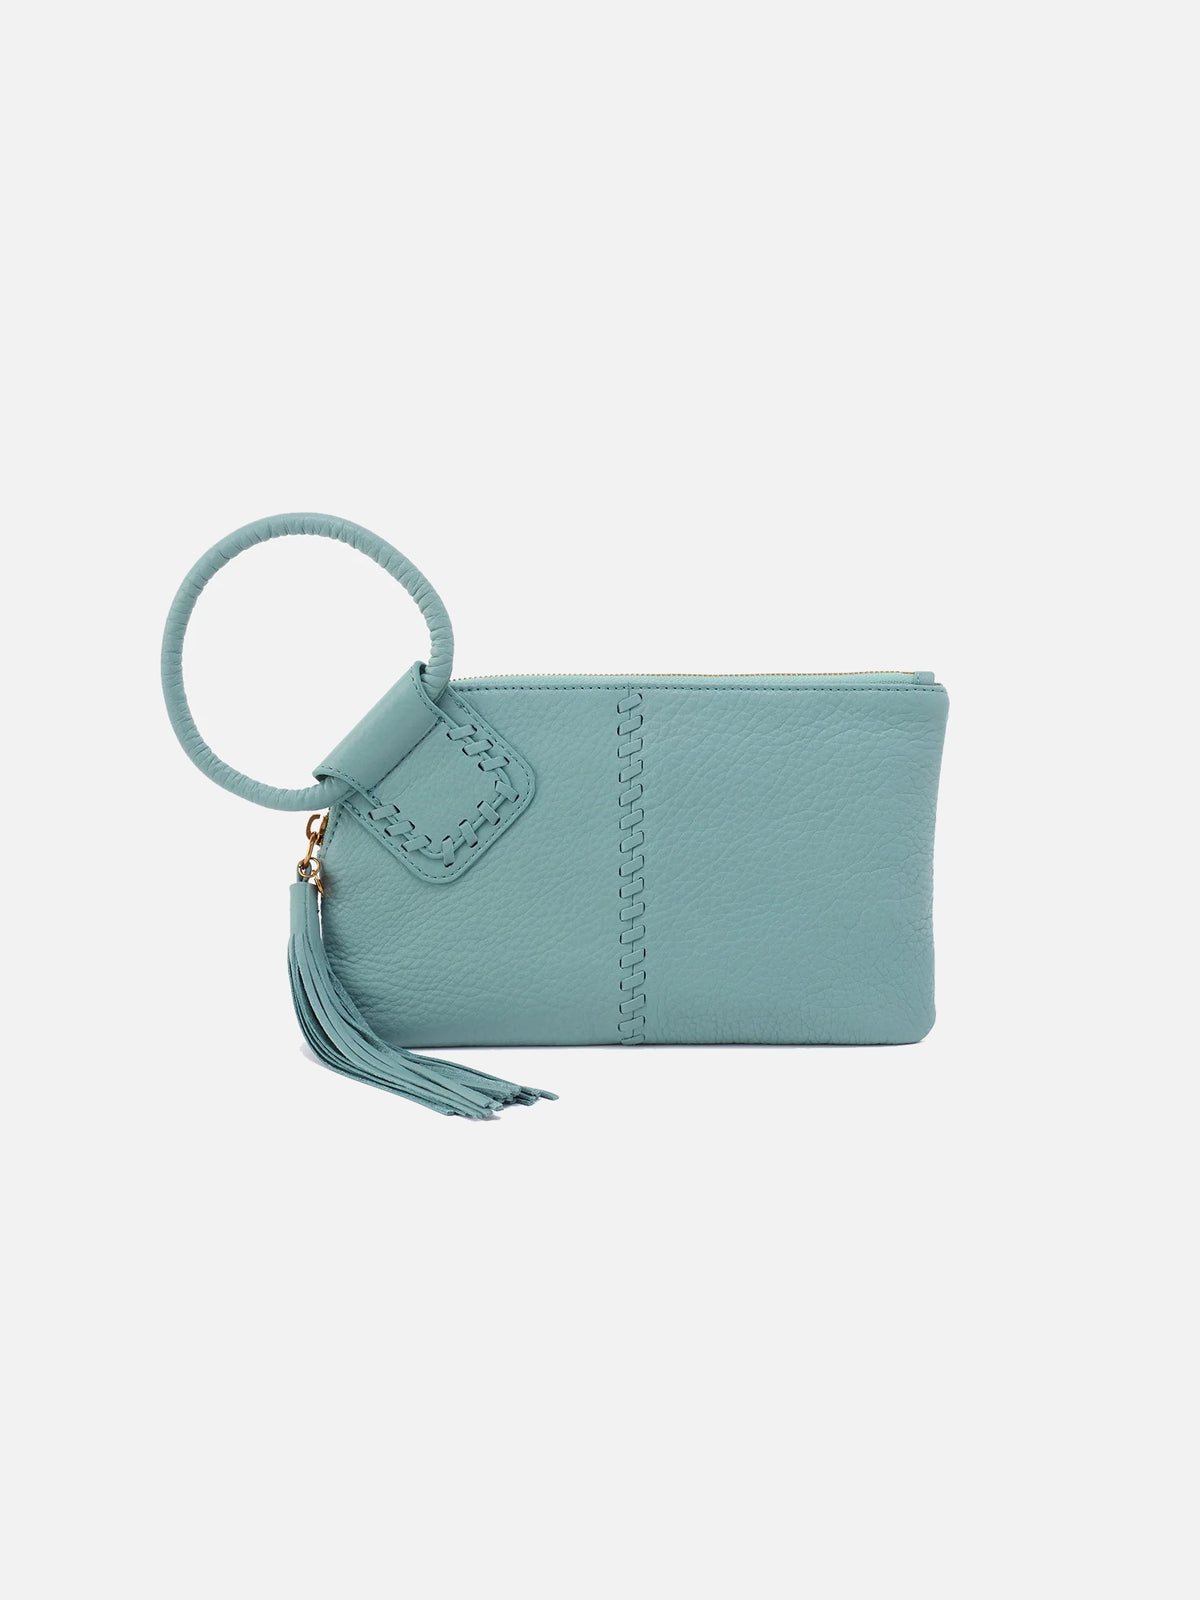 hobo sable wristlet in pale green pebbled leather